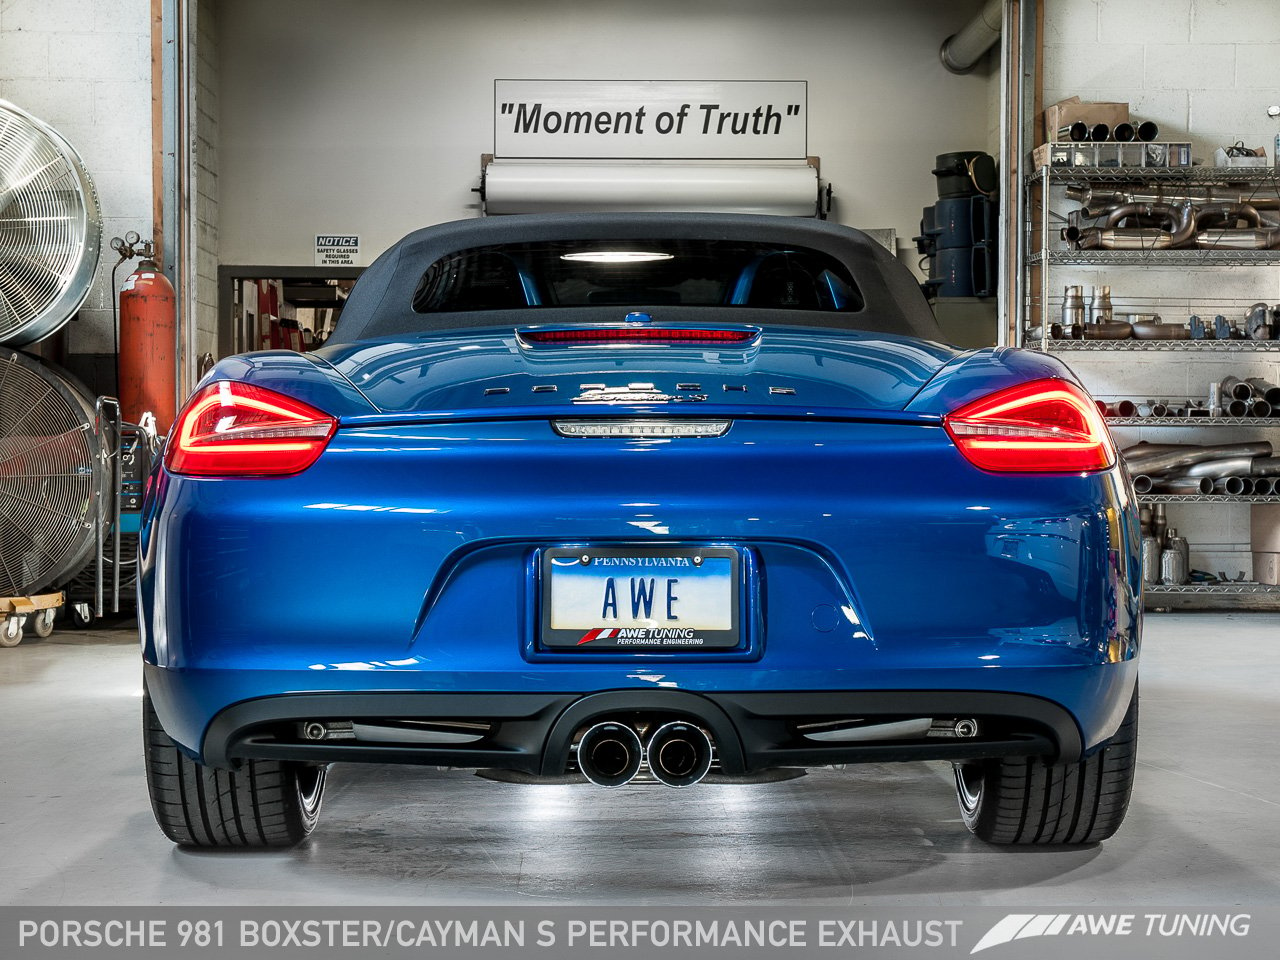 Performance Exhaust System for Porsche 981 - With